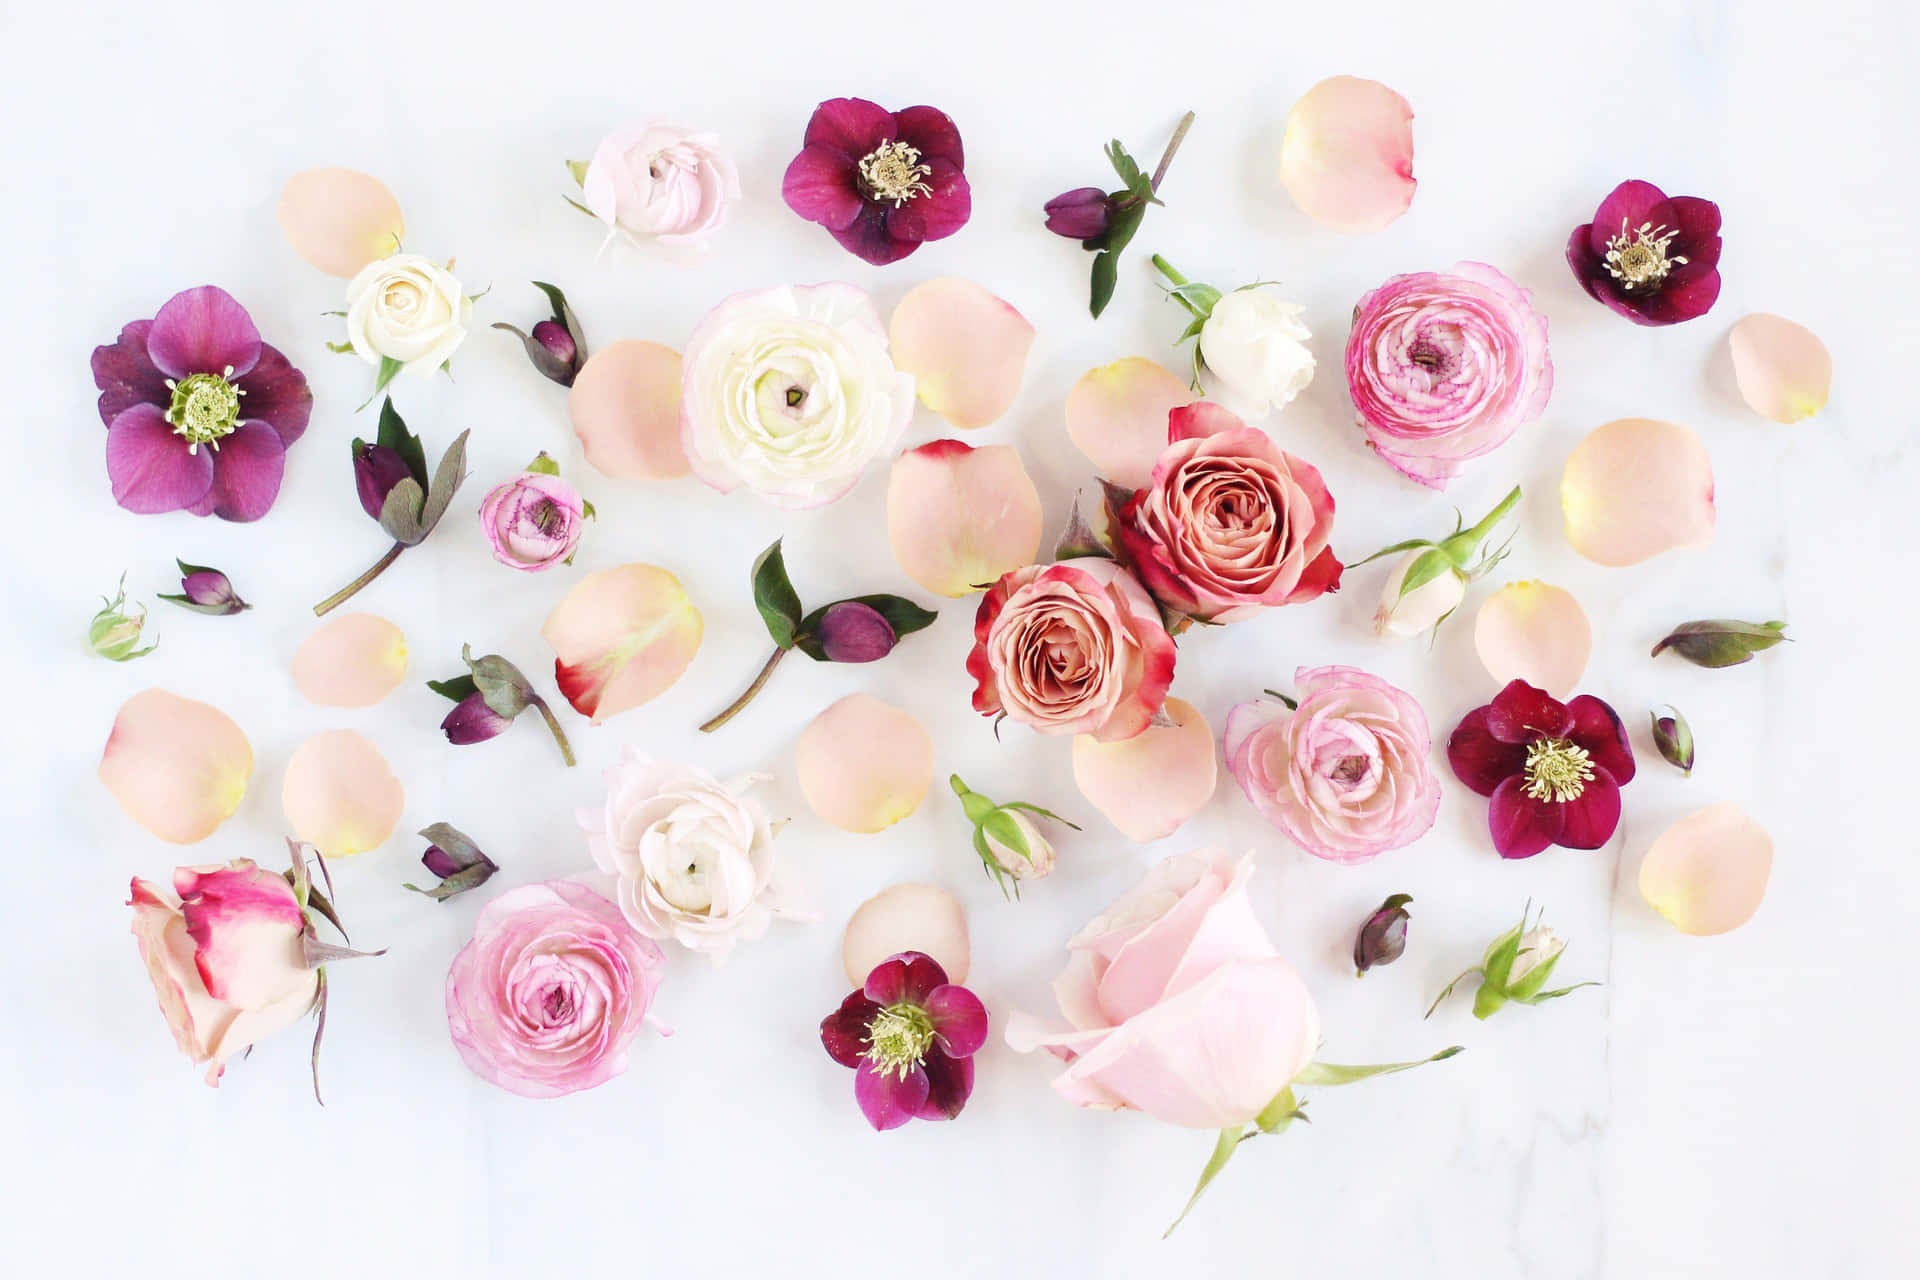 A Bouquet Of Pink And White Flowers On A White Background Wallpaper